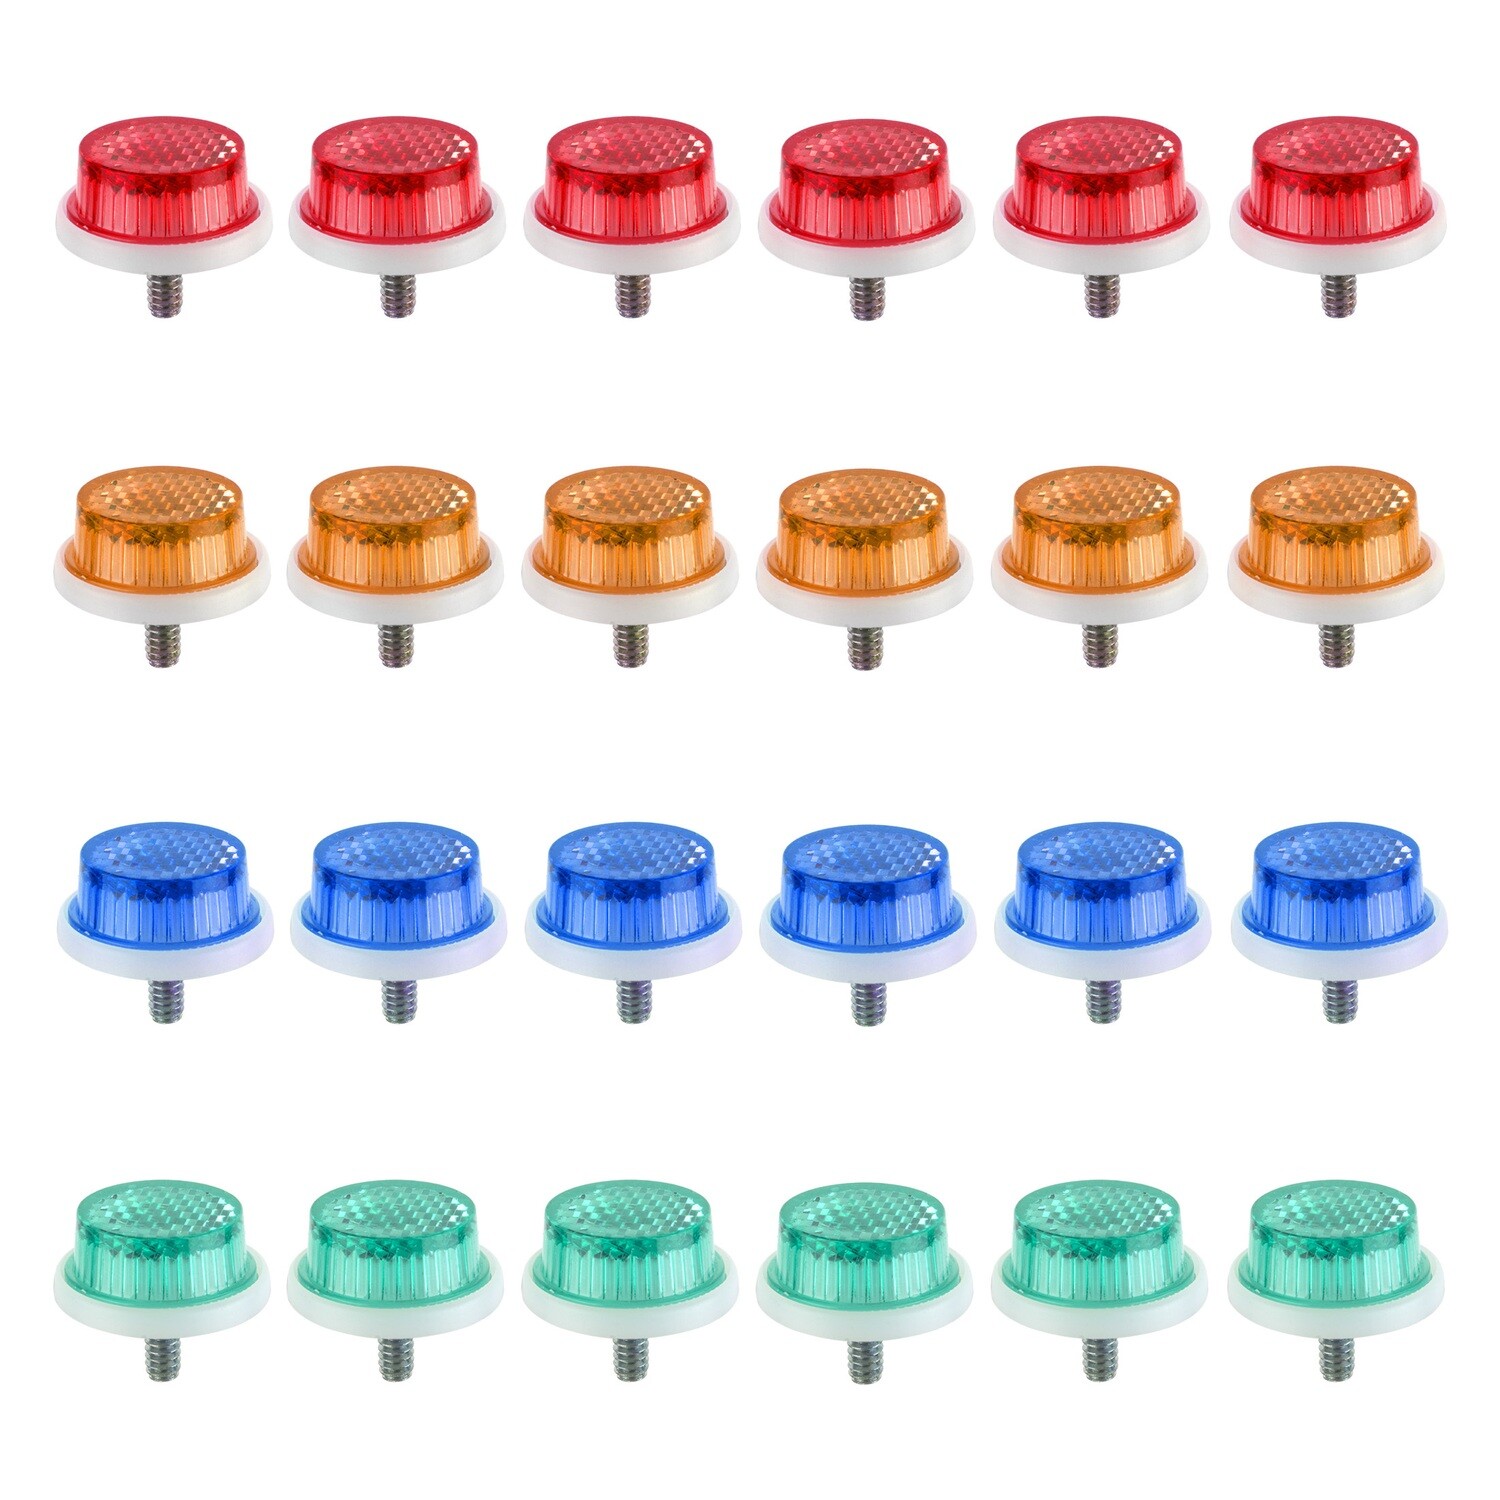 Omega 1" Reflectors 4 colors 24 to a cardw/ wing nut